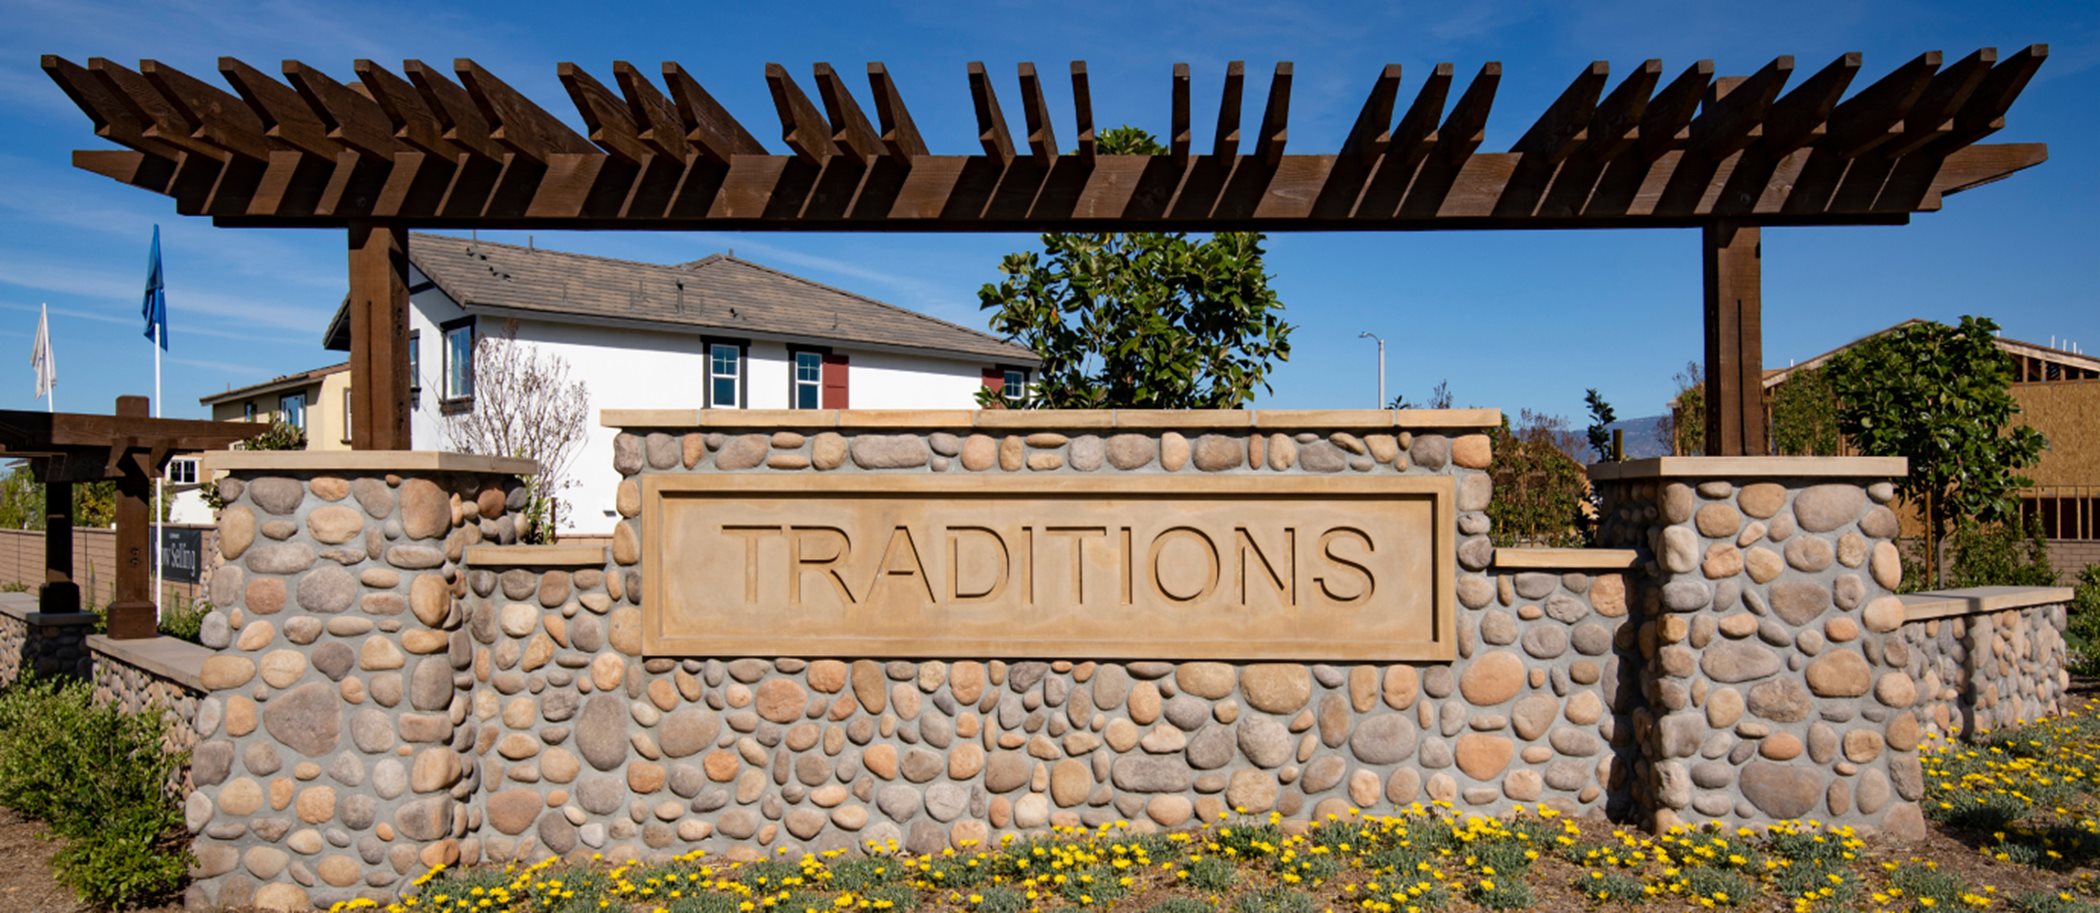 Traditions sign